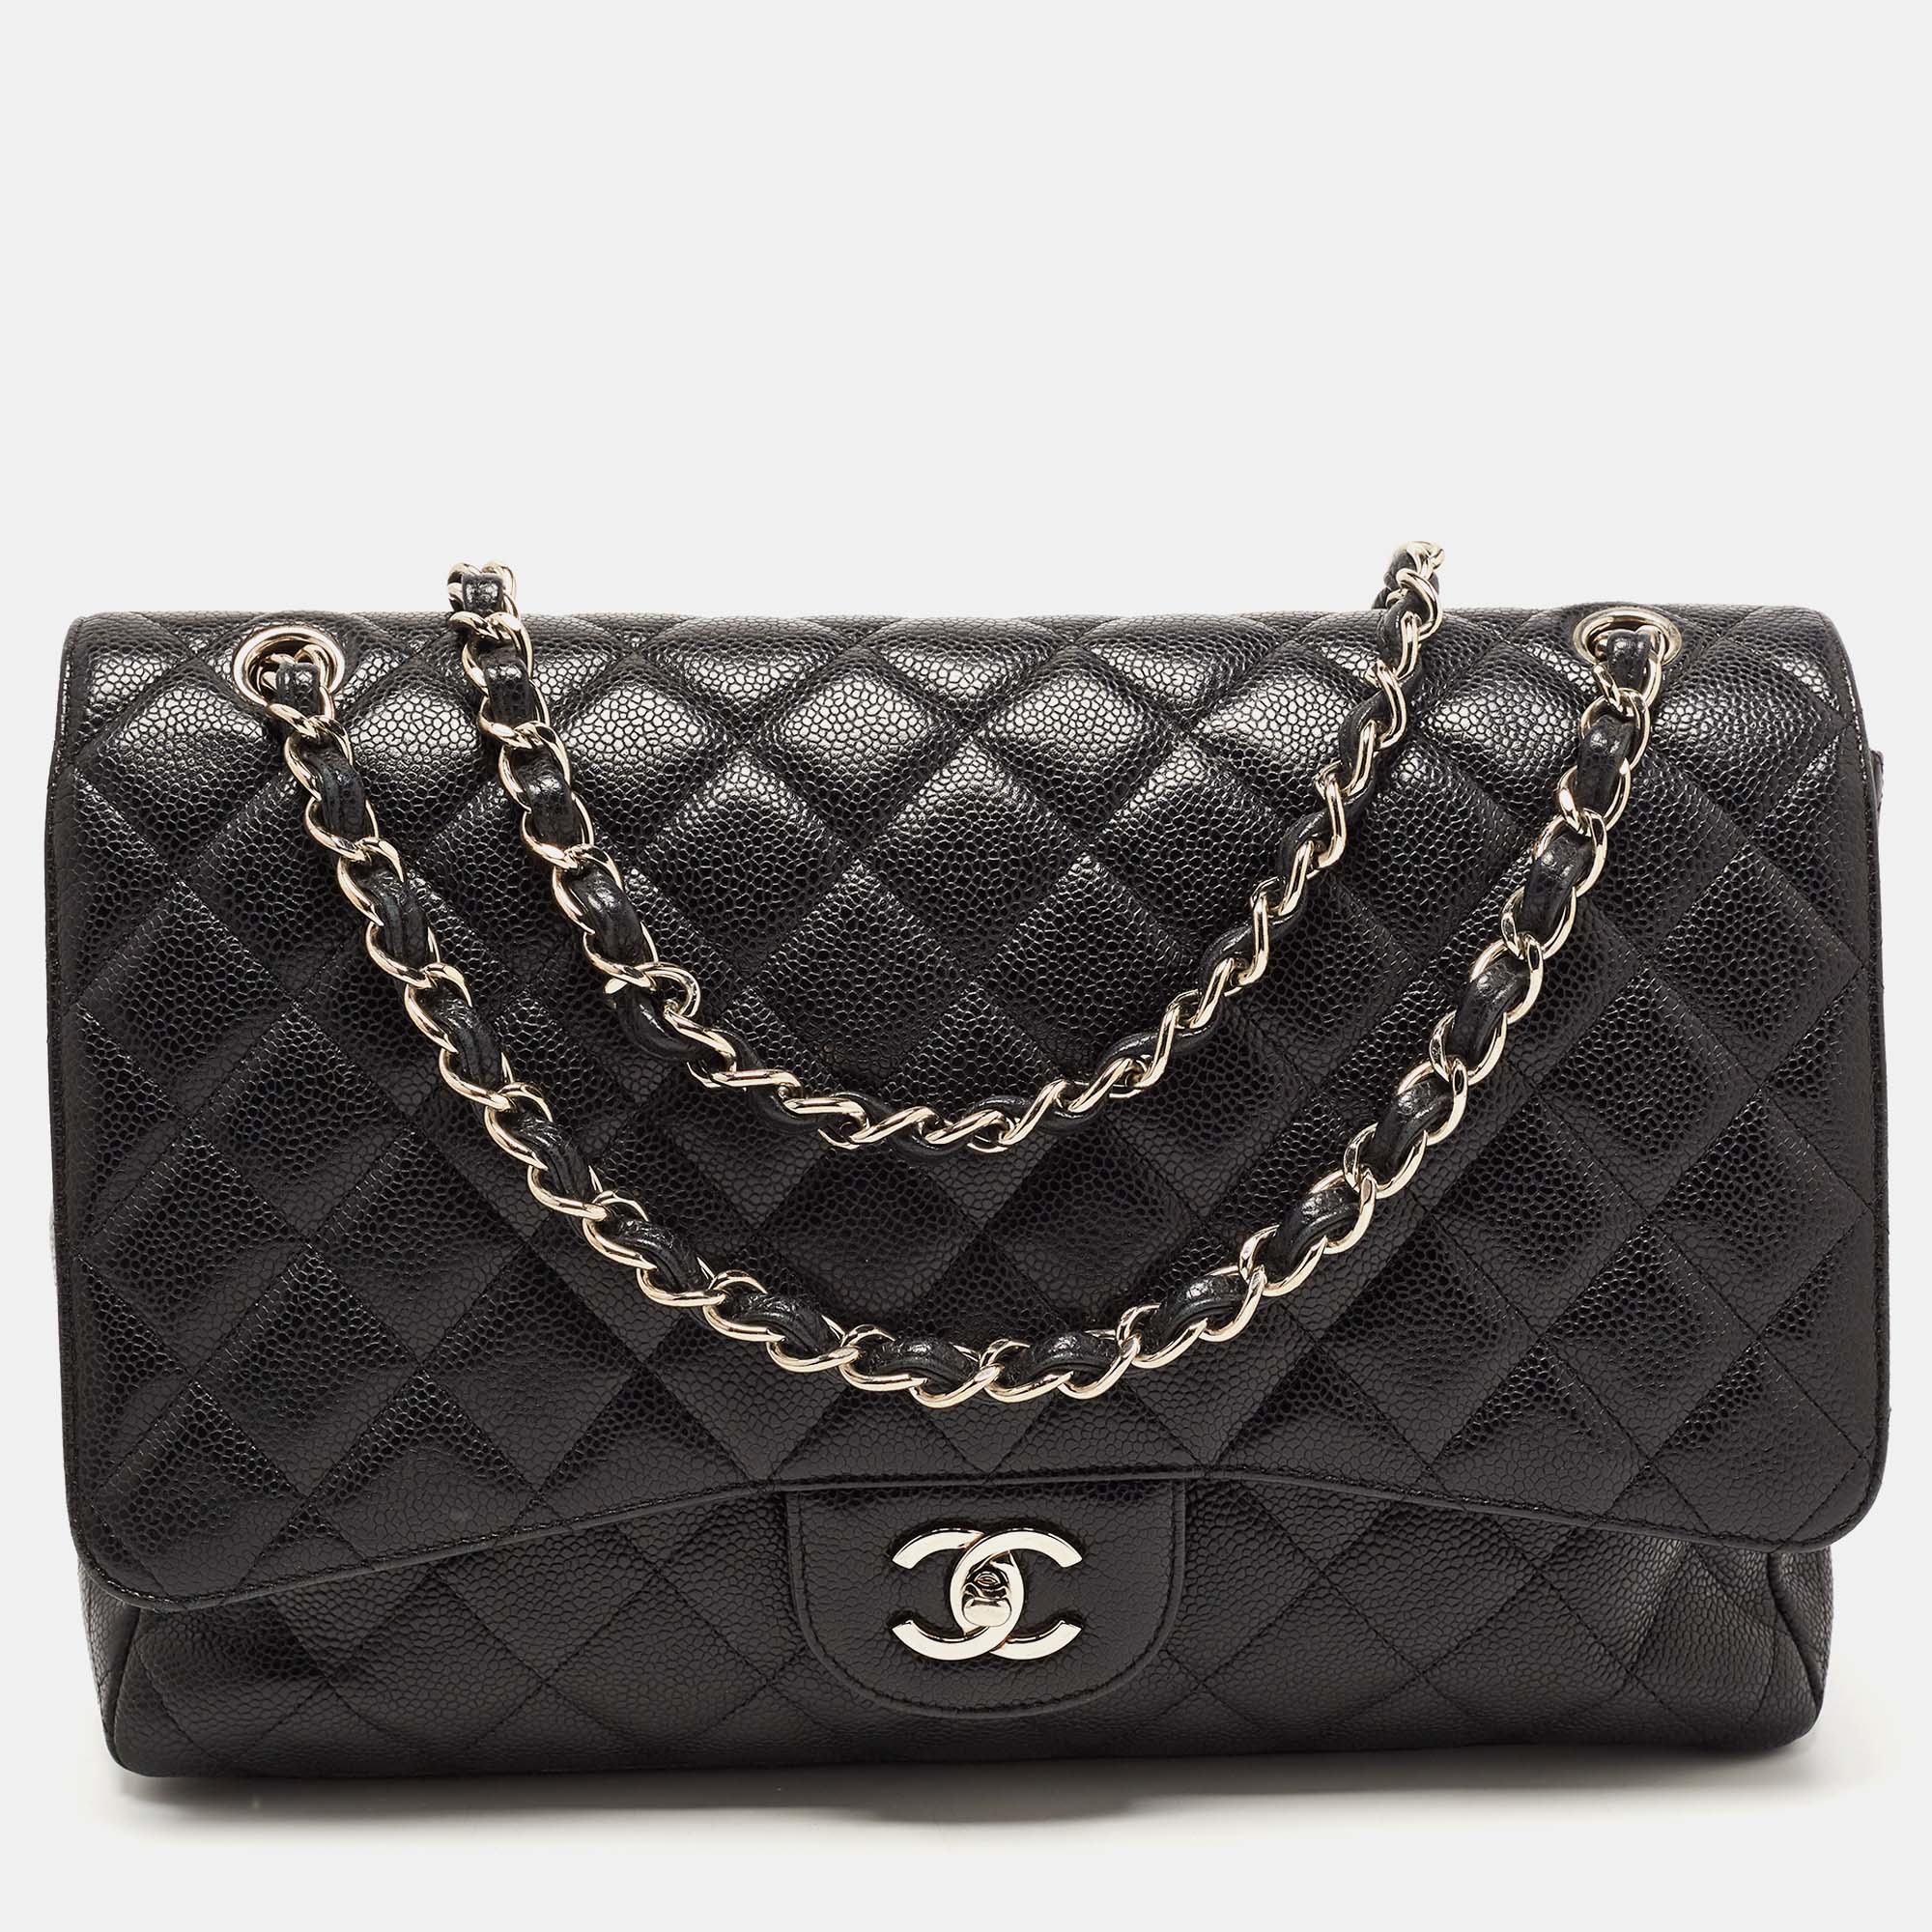 Chanel Black Quilted Caviar Leather Maxi Classic Single Flap Bag Chanel